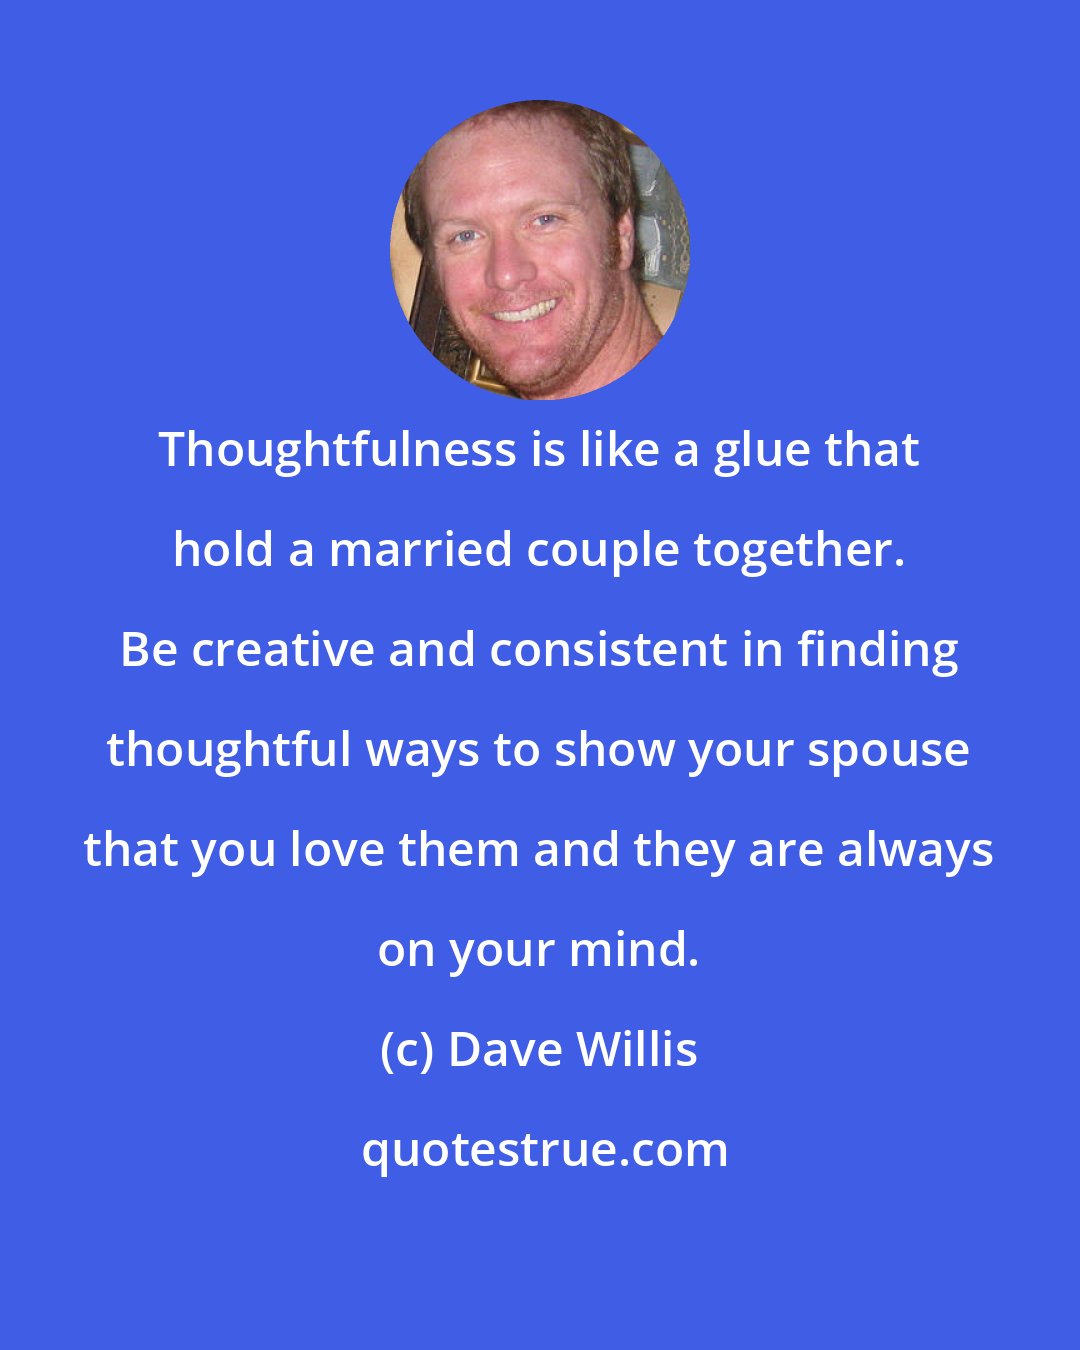 Dave Willis: Thoughtfulness is like a glue that hold a married couple together. Be creative and consistent in finding thoughtful ways to show your spouse that you love them and they are always on your mind.